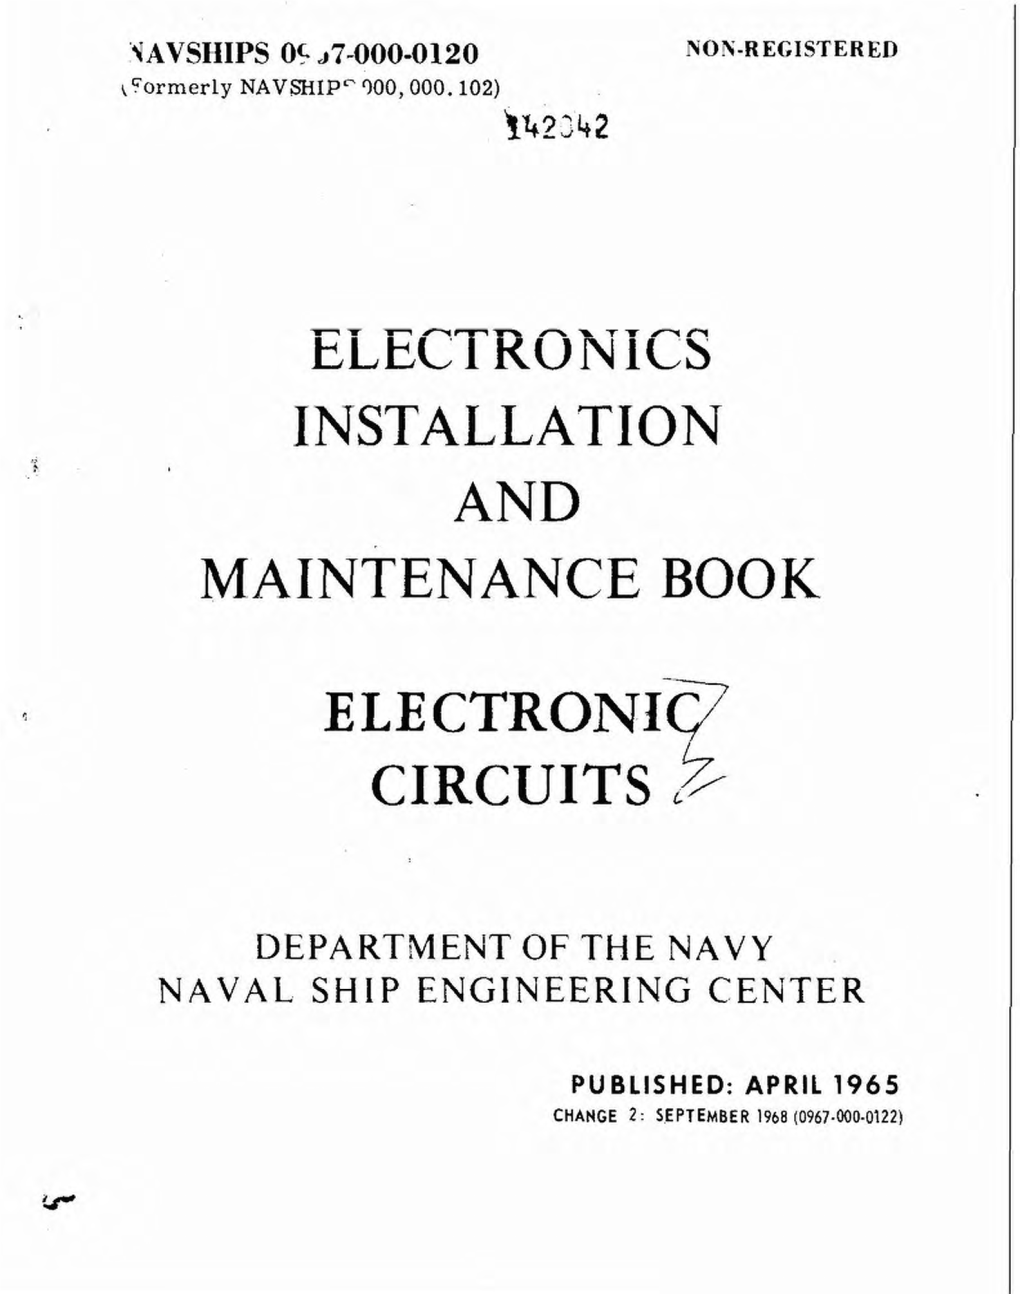 Installation and Maintenance Book